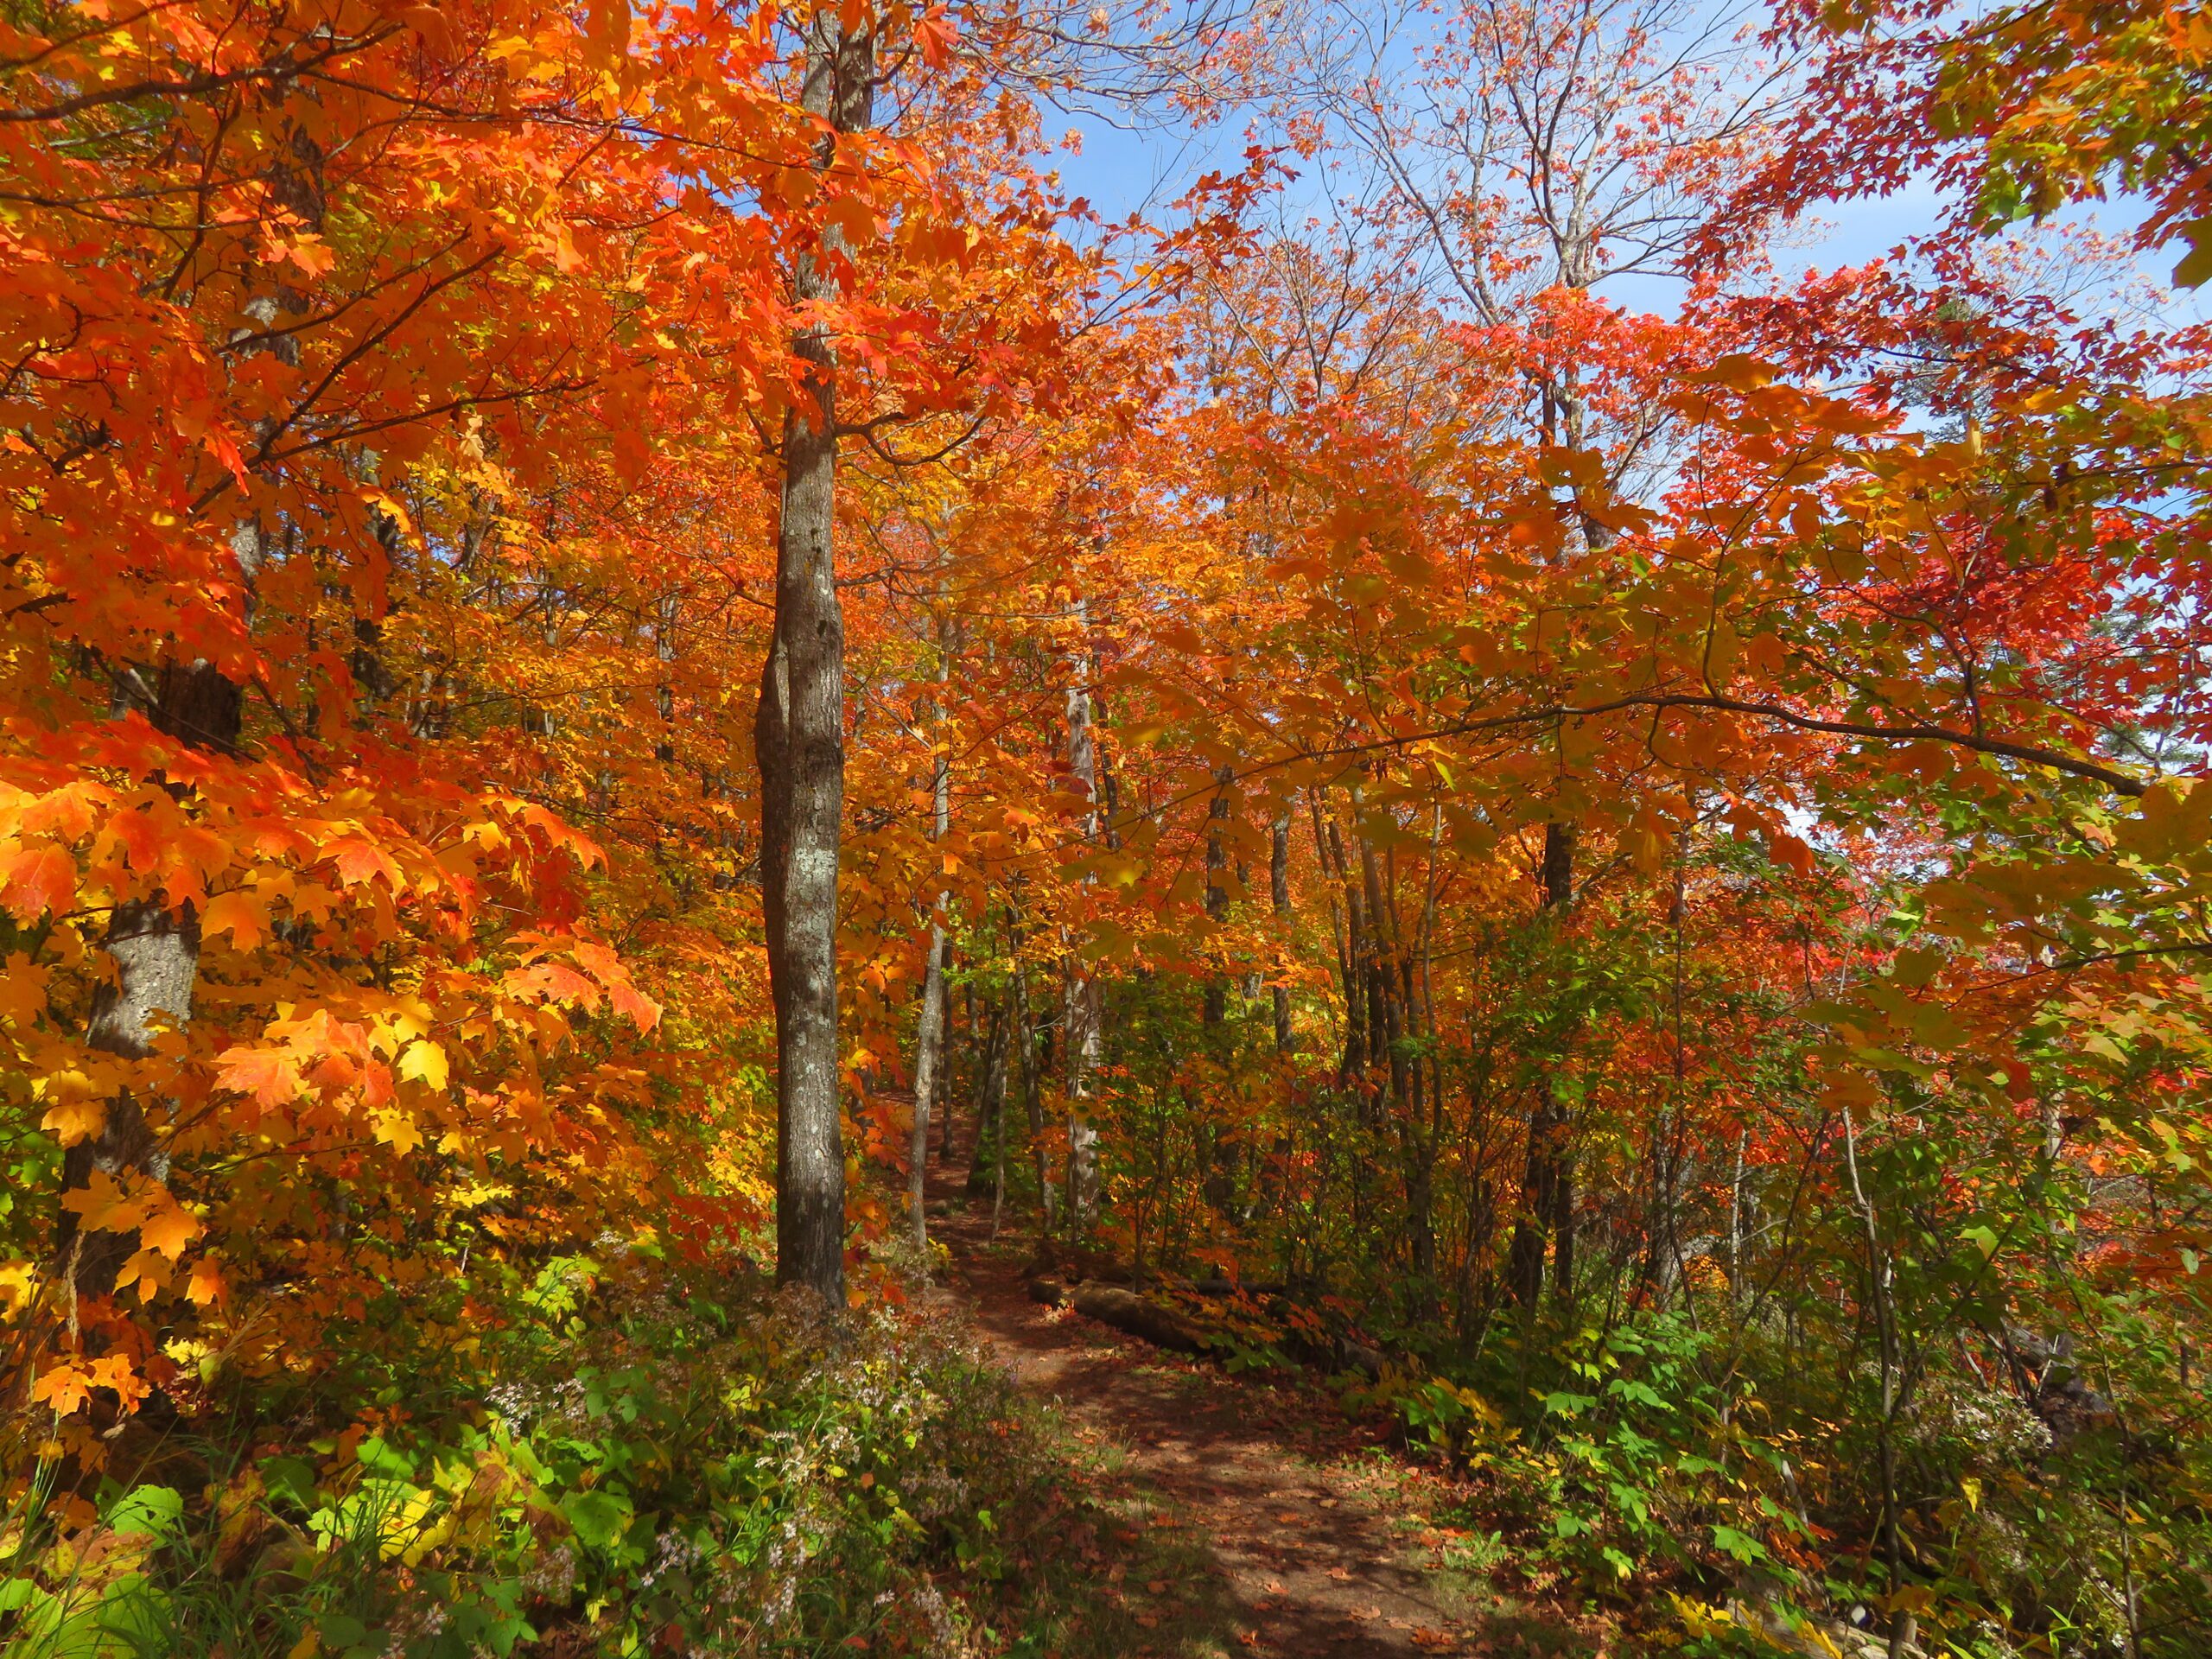 wooded trail through orange and red maple trees